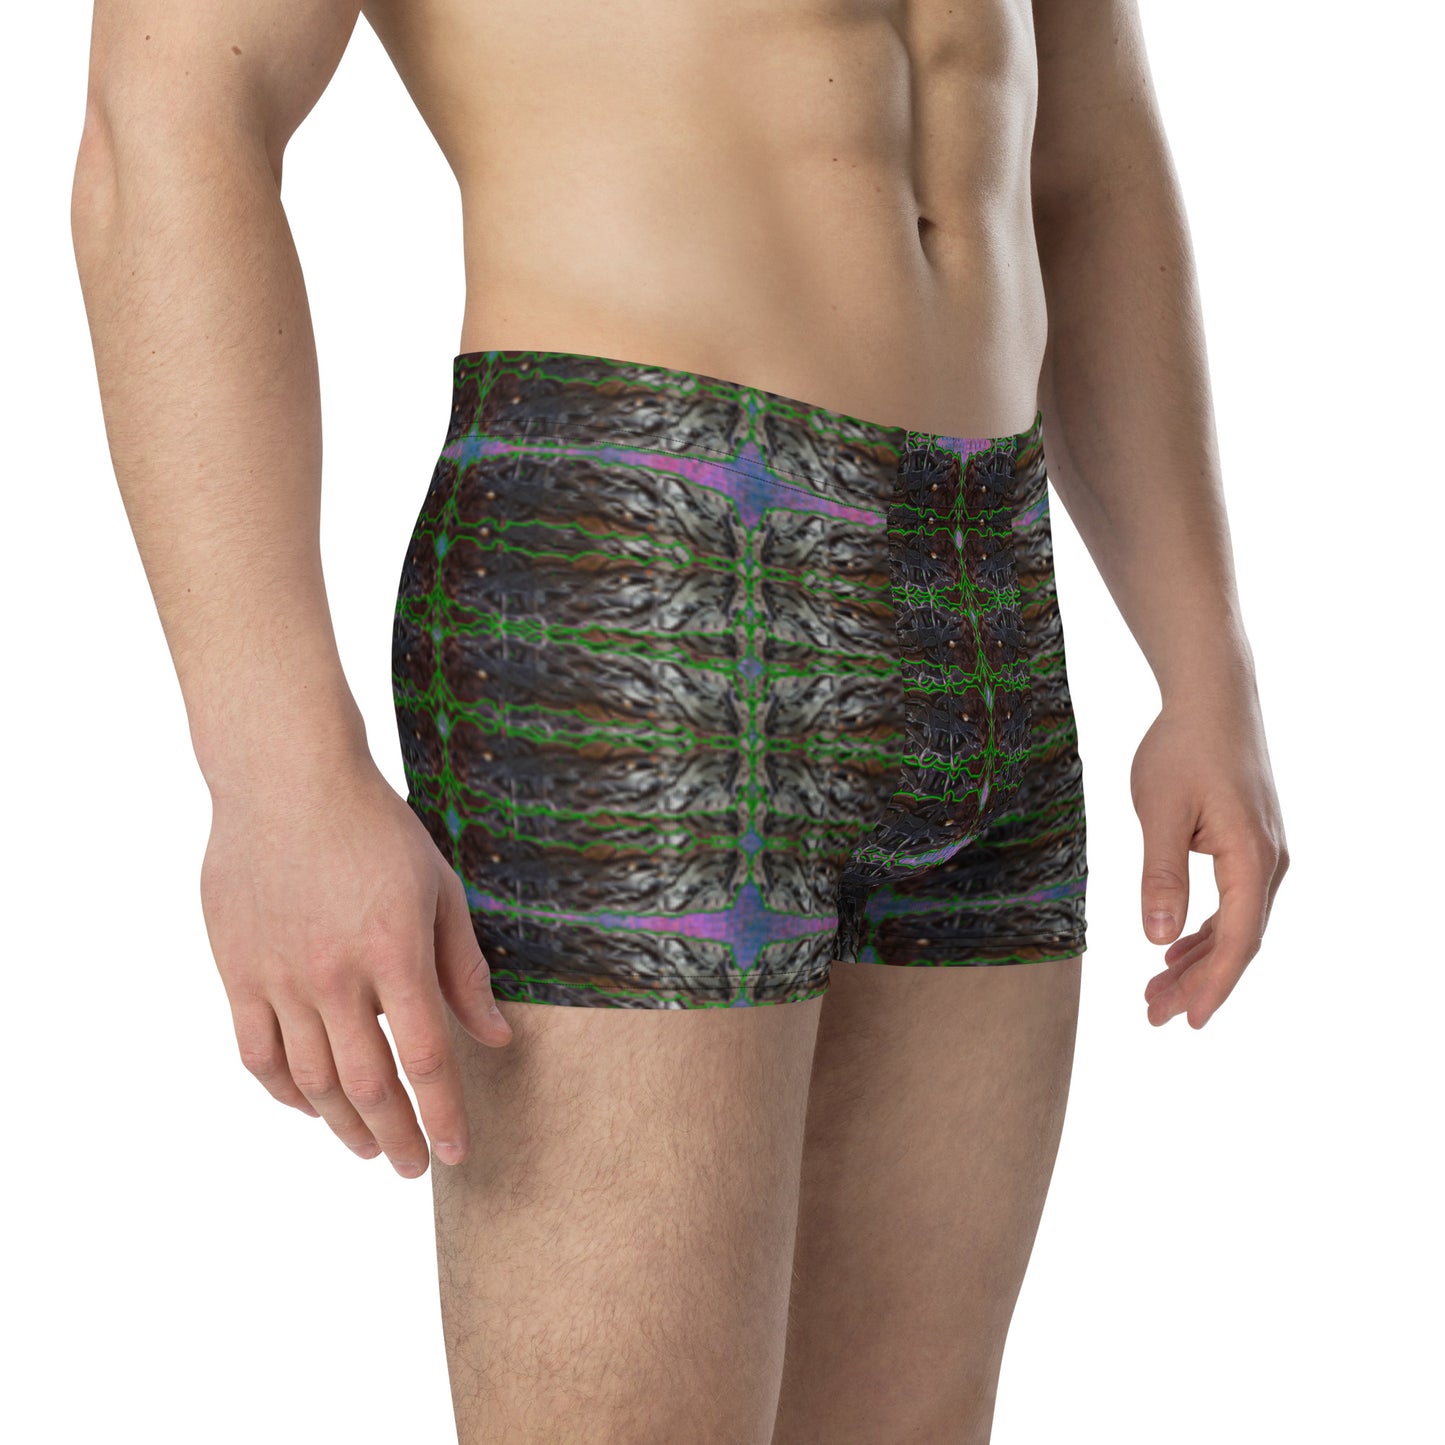 Boxer Briefs (His/They)(Rind#4 Tree Link) RJSTH@Fabric#4 RJSTHW2021 RJS